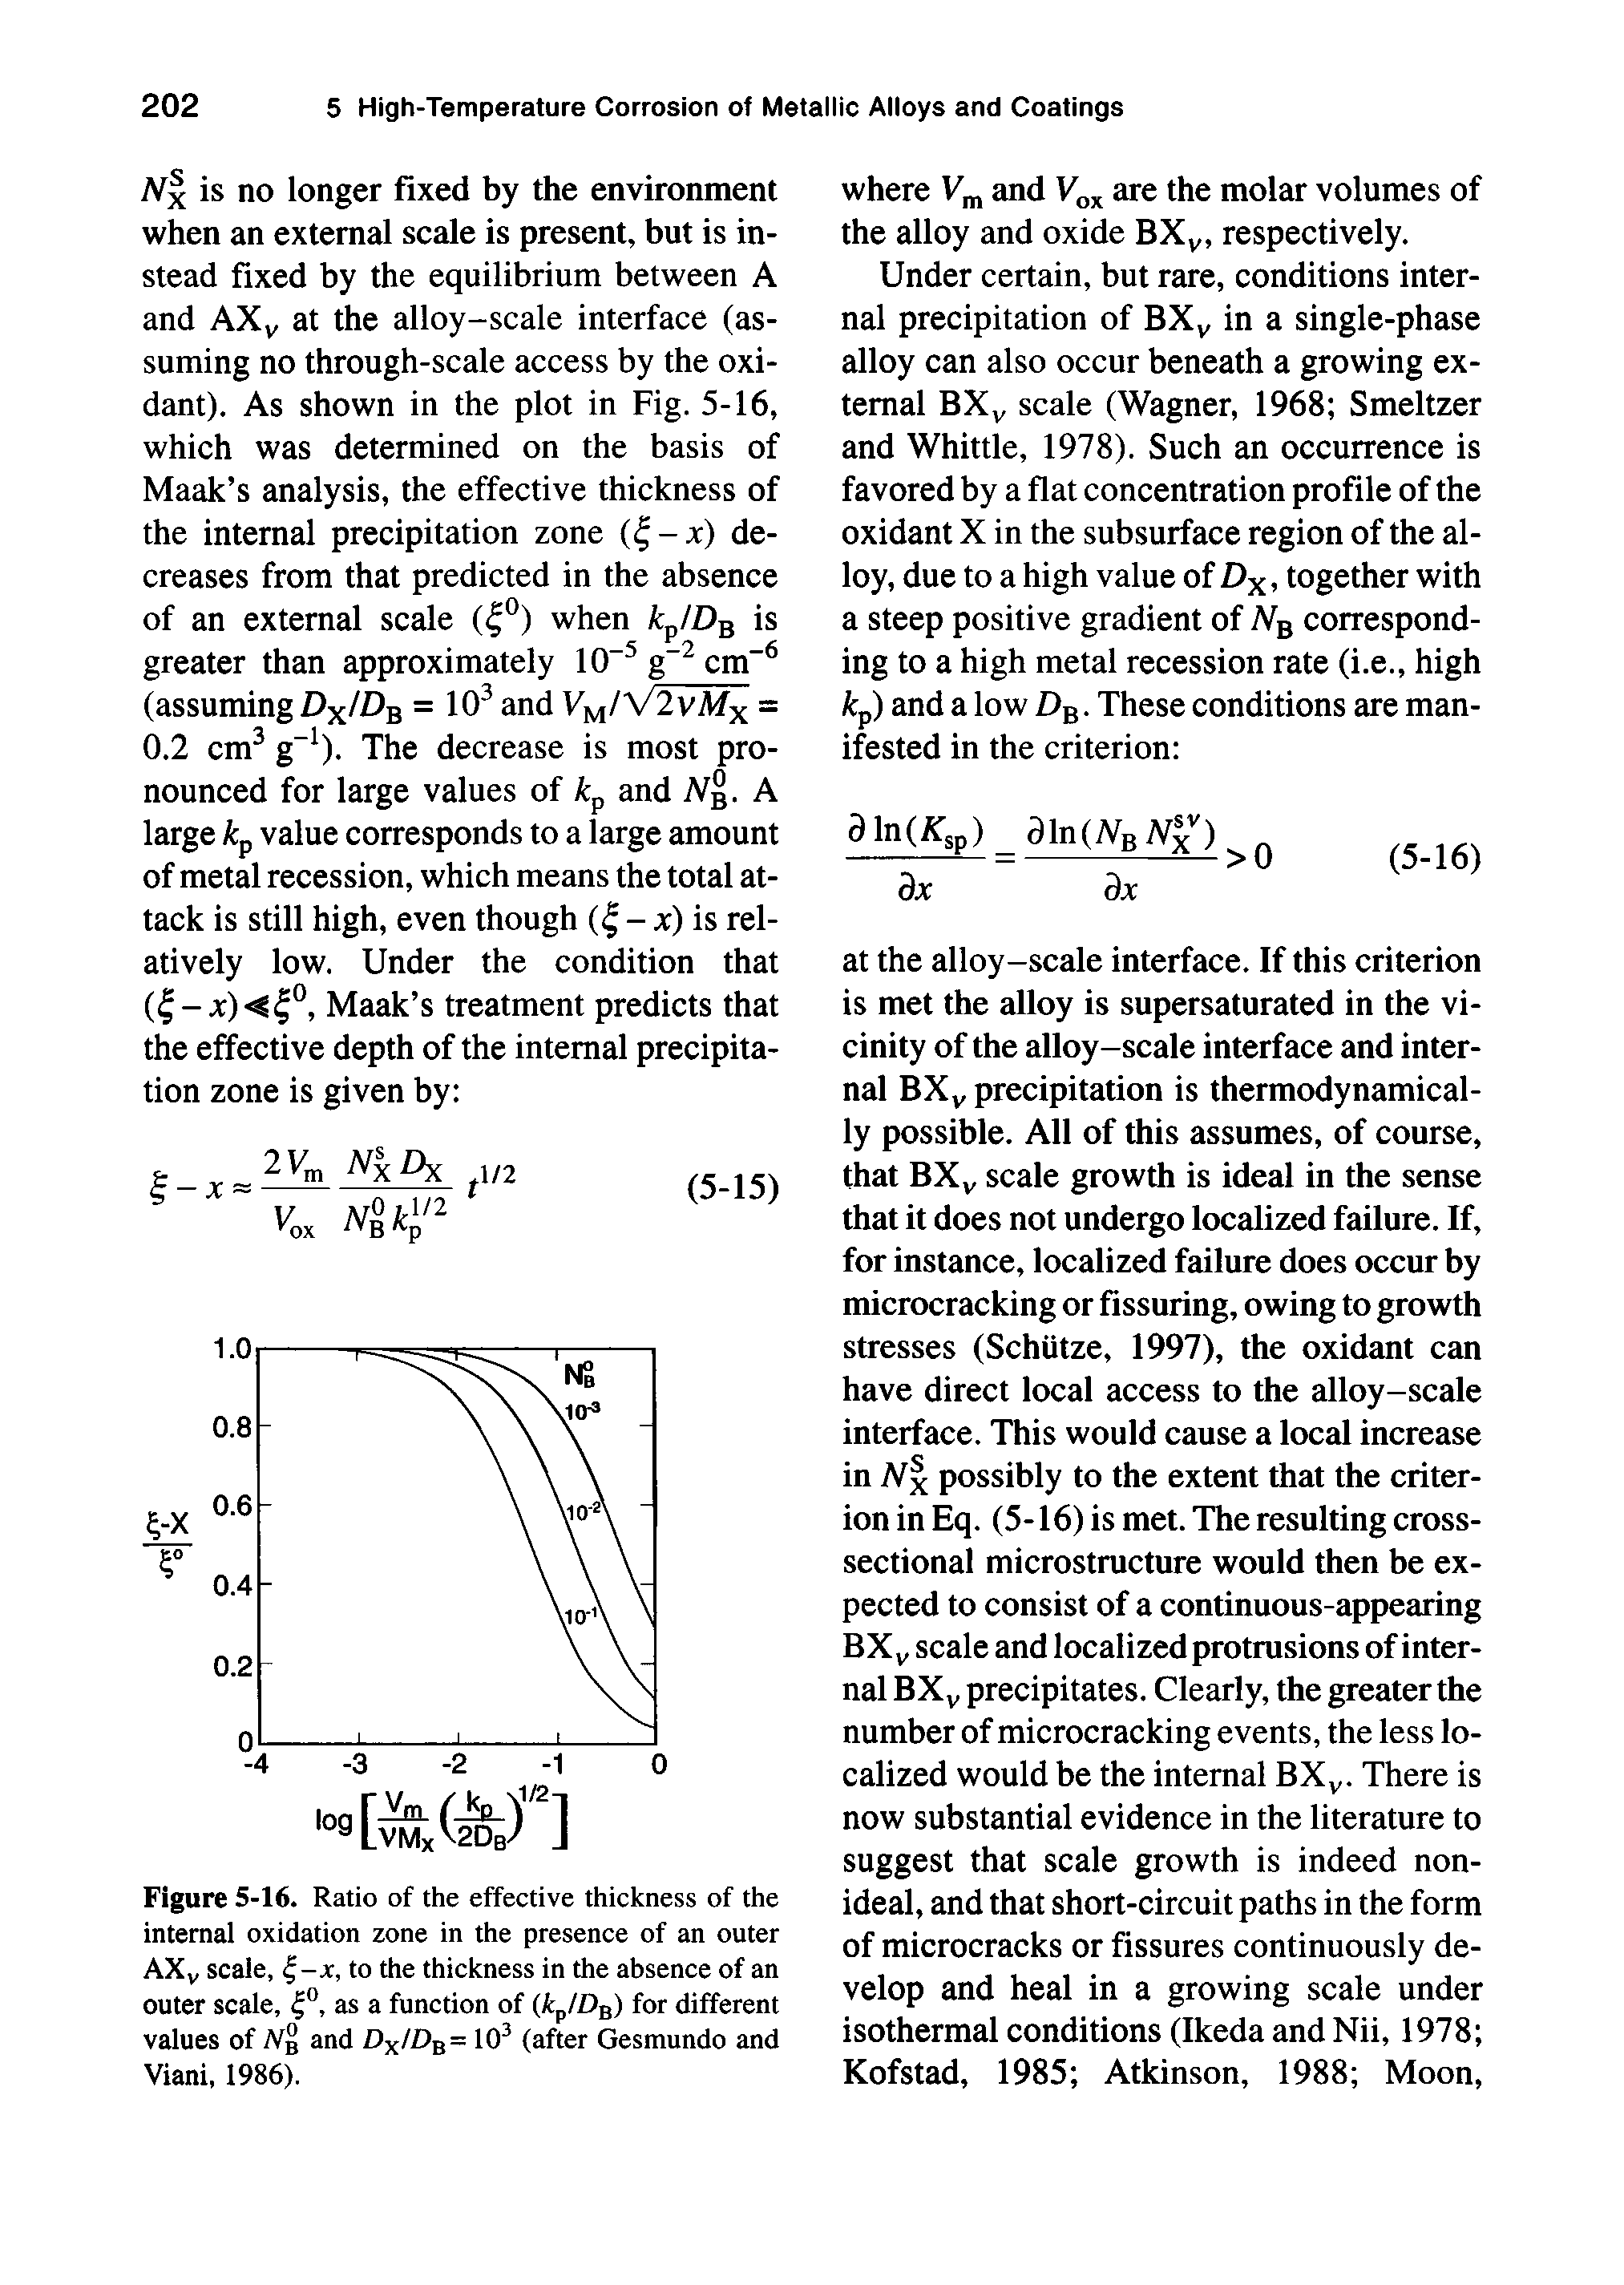 Figure 5-16. Ratio of the effective thickness of the internal oxidation zone in the presence of an outer AXy scale, to the thickness in the absence of an outer scale, 4°, as a function of (kpID ) for different values of A b and DxlD = 10 (after Gesmundo and Viani, 1986).